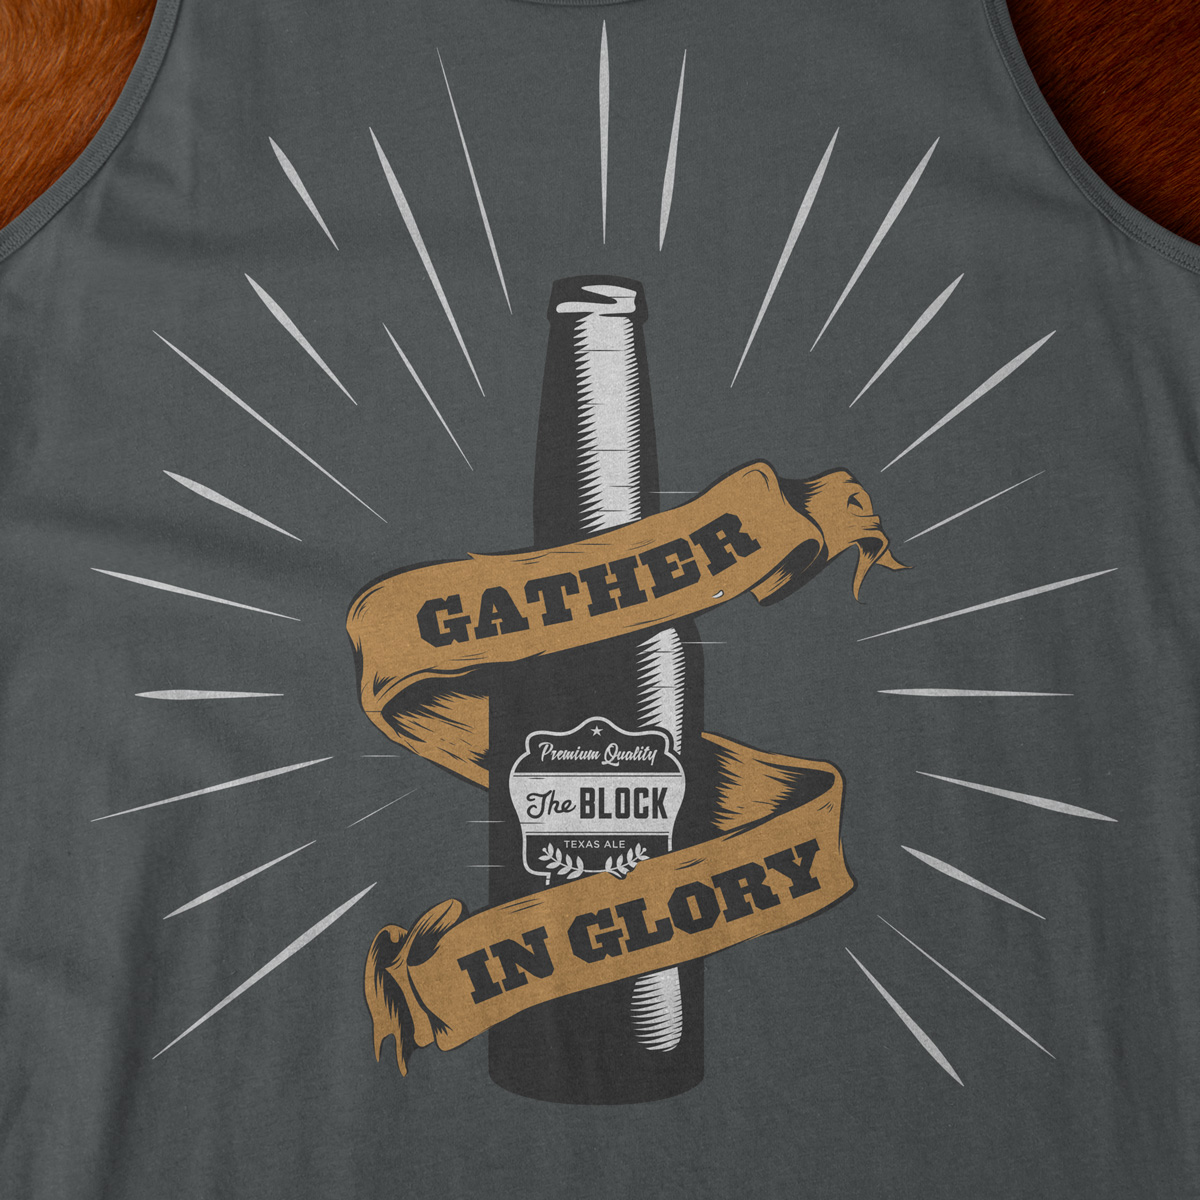 The Block Gather In Glory Tank - Detail